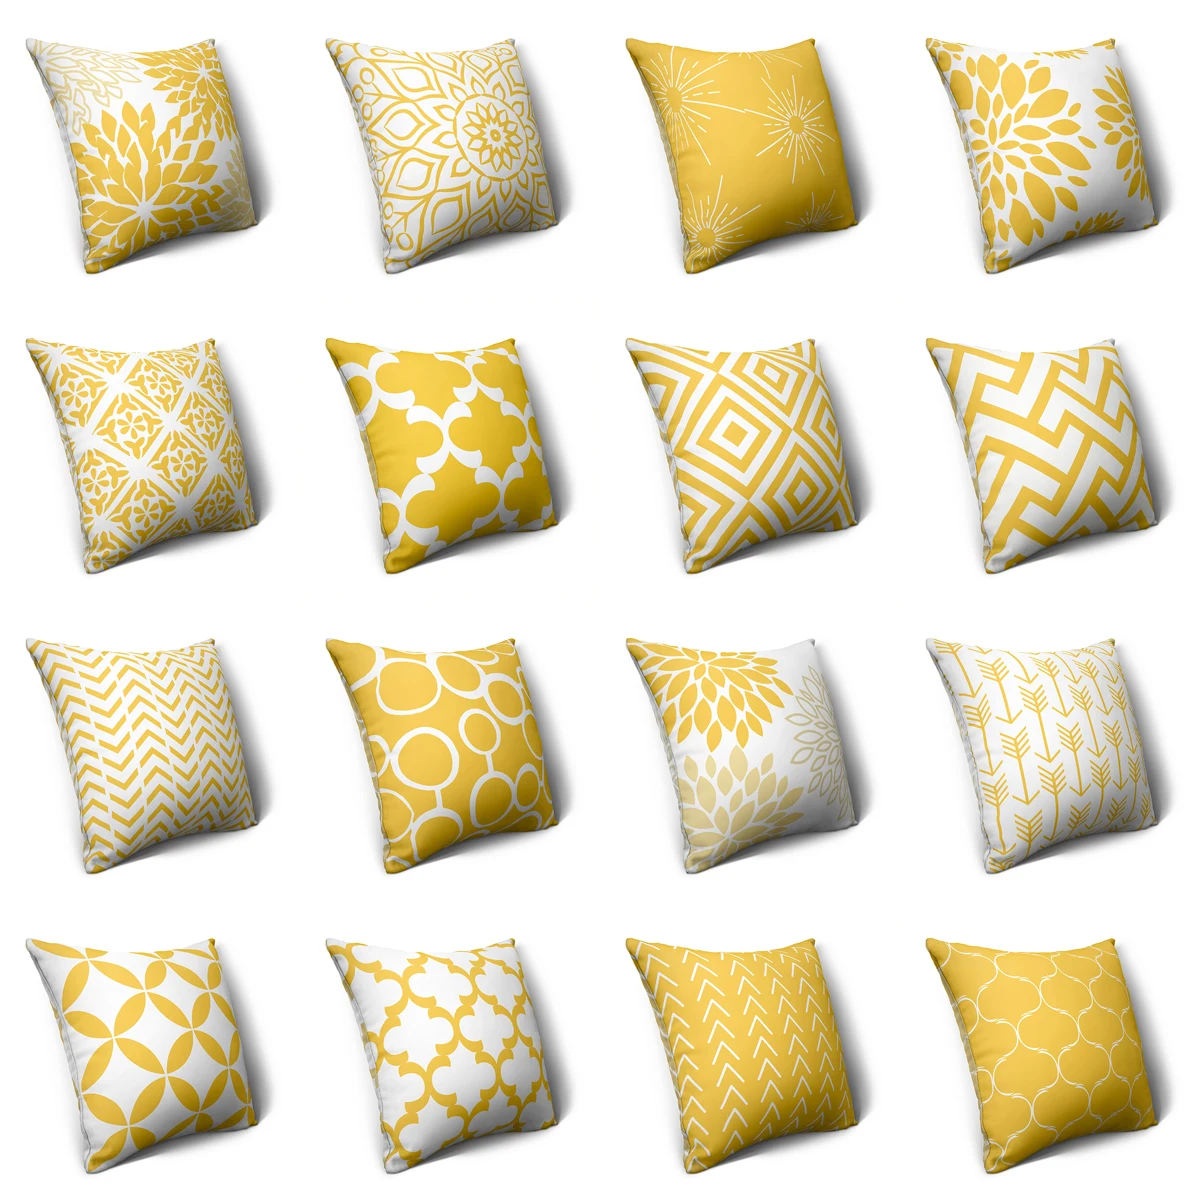 

ZHENHE Yellow Geometric Square Pillow Case Double Sided Printing Cushion Cover for Bedroom Sofa Decor 18x18 Inch （45x45cm）